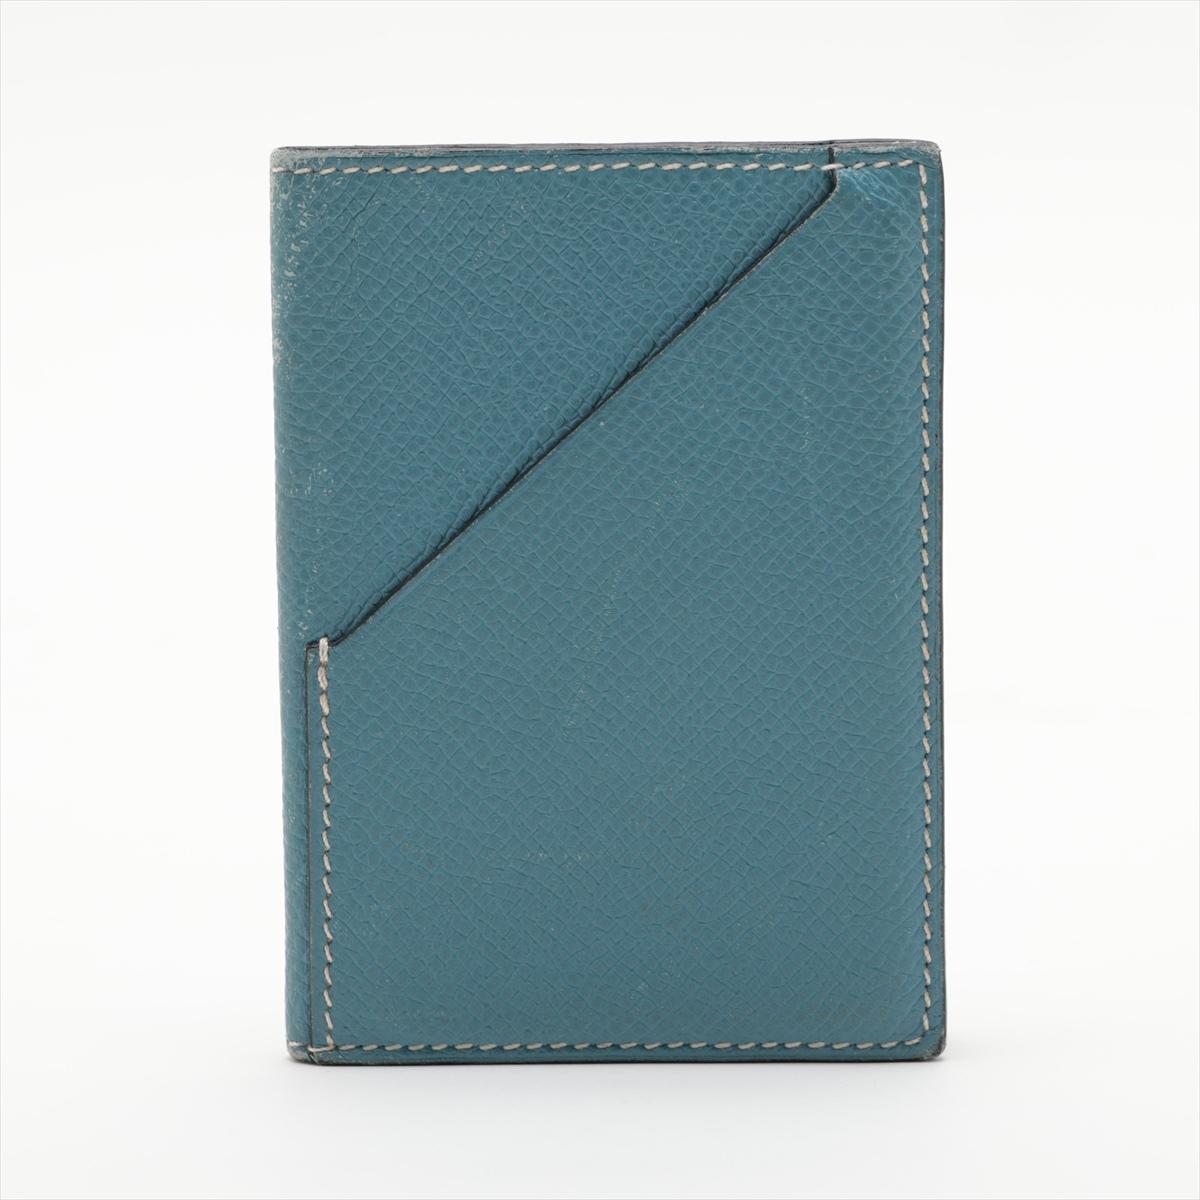 The Hermès Veau Epsom Card Case in Blue is a luxurious and practical accessory designed for the modern individual. Crafted from high-quality Veau Epsom leather, known for its fine grain texture and durability, the card case exudes understated